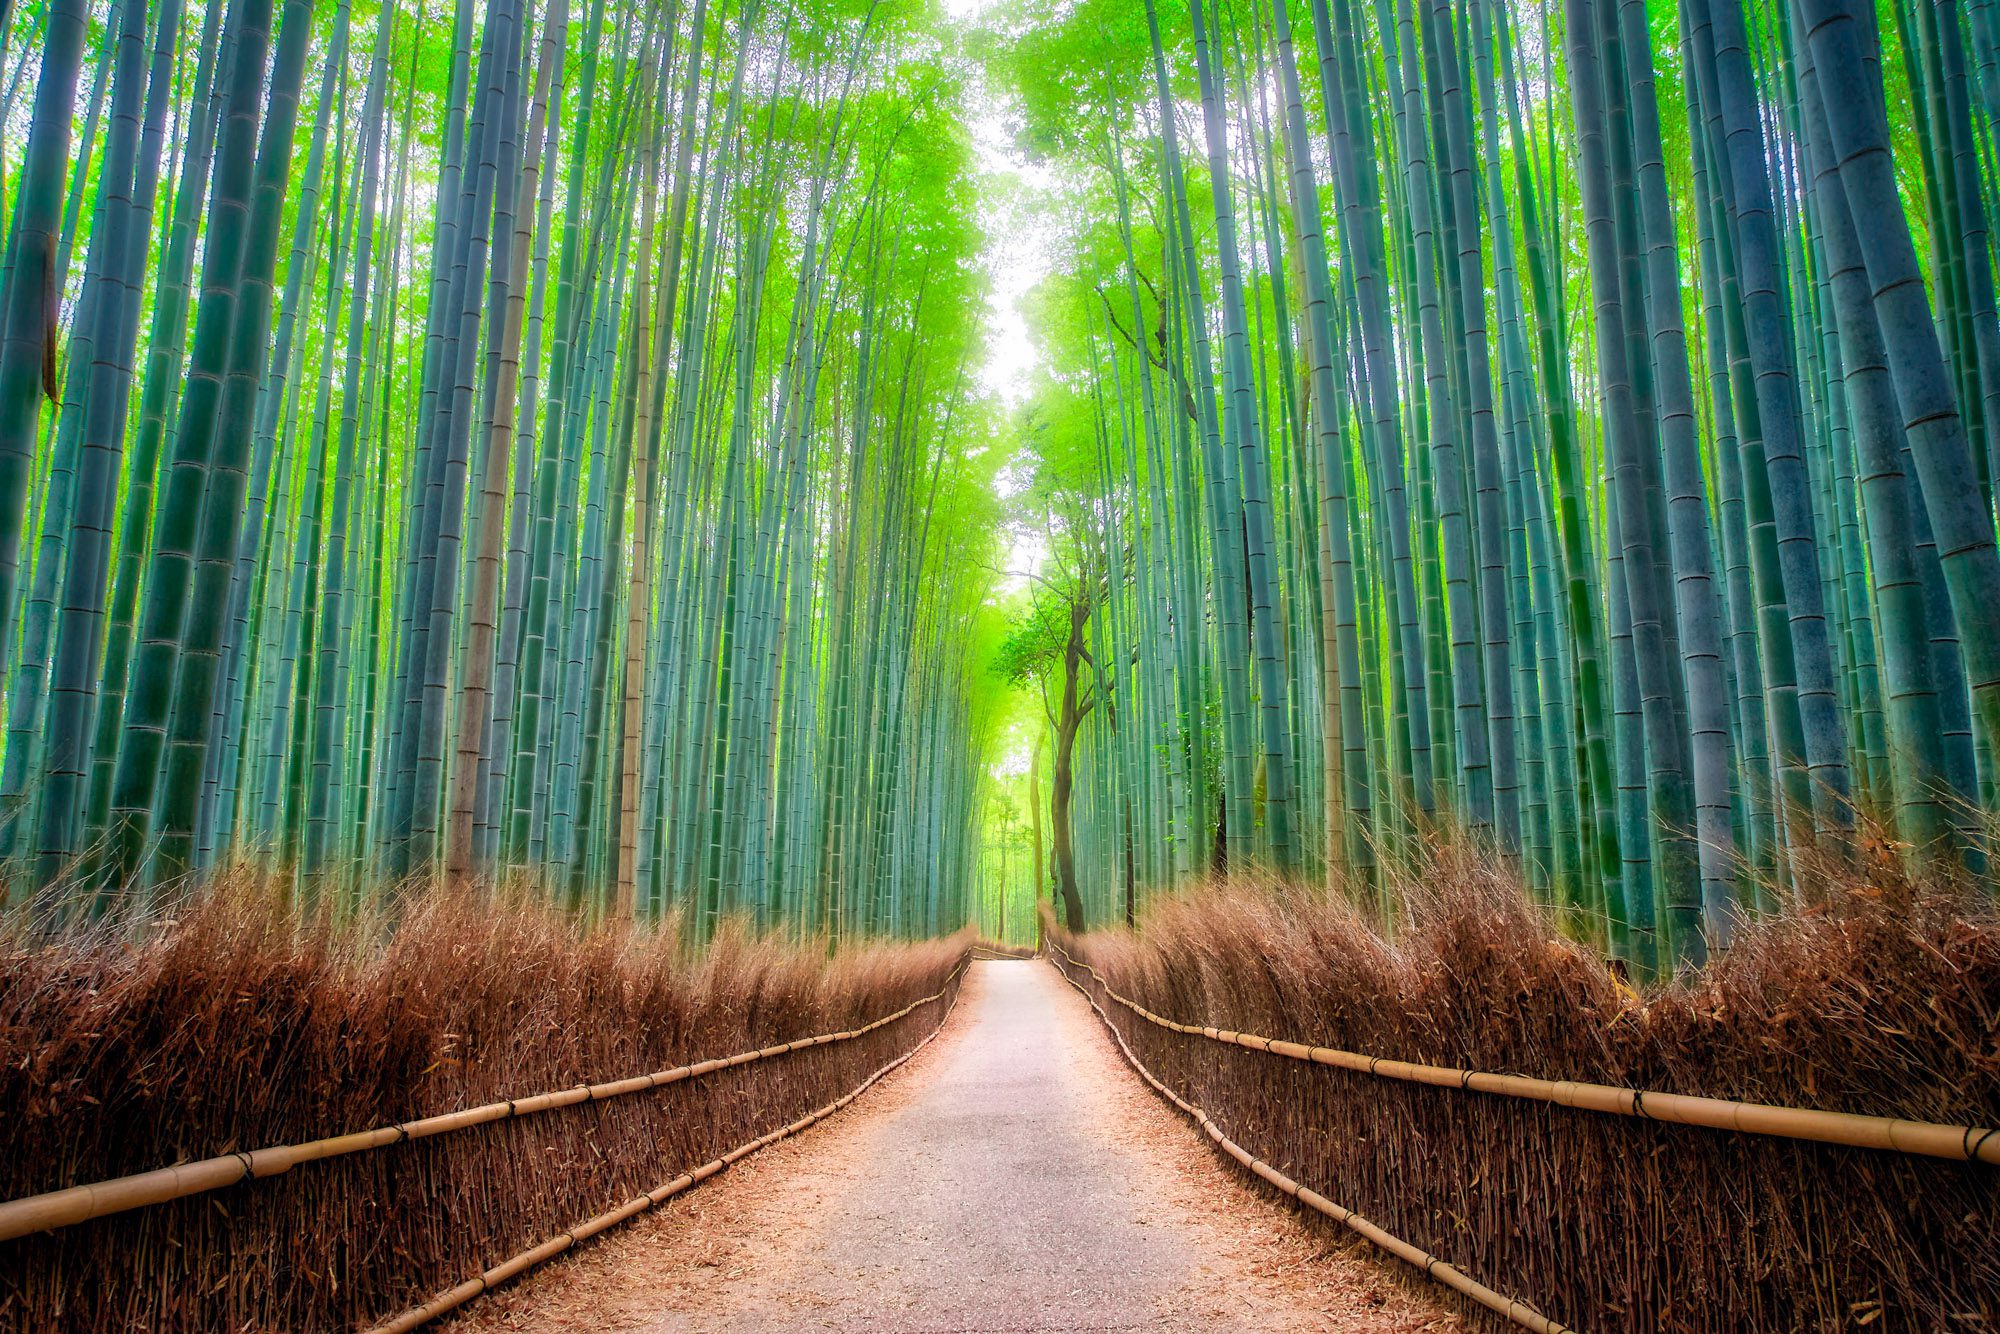 A serene path stretches through a dense bamboo forest, with towering green stalks rising on either side, and a soft, hazy light filtering through the canopy.